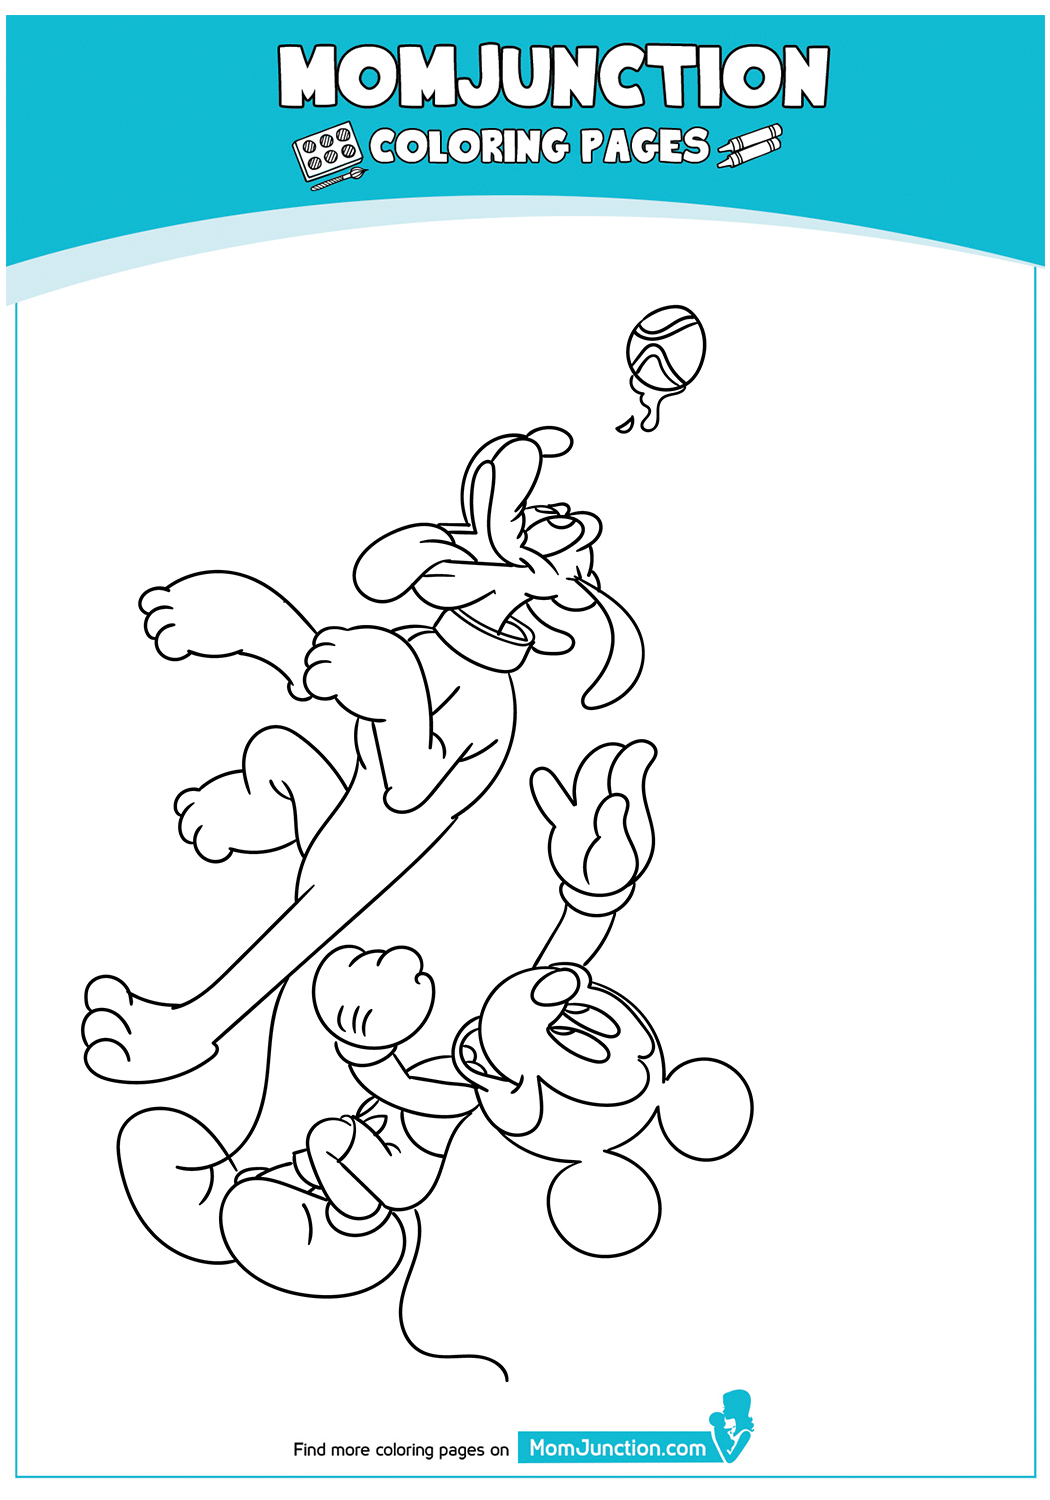 Mickey-Mouse-Playing-with-Pluto-17